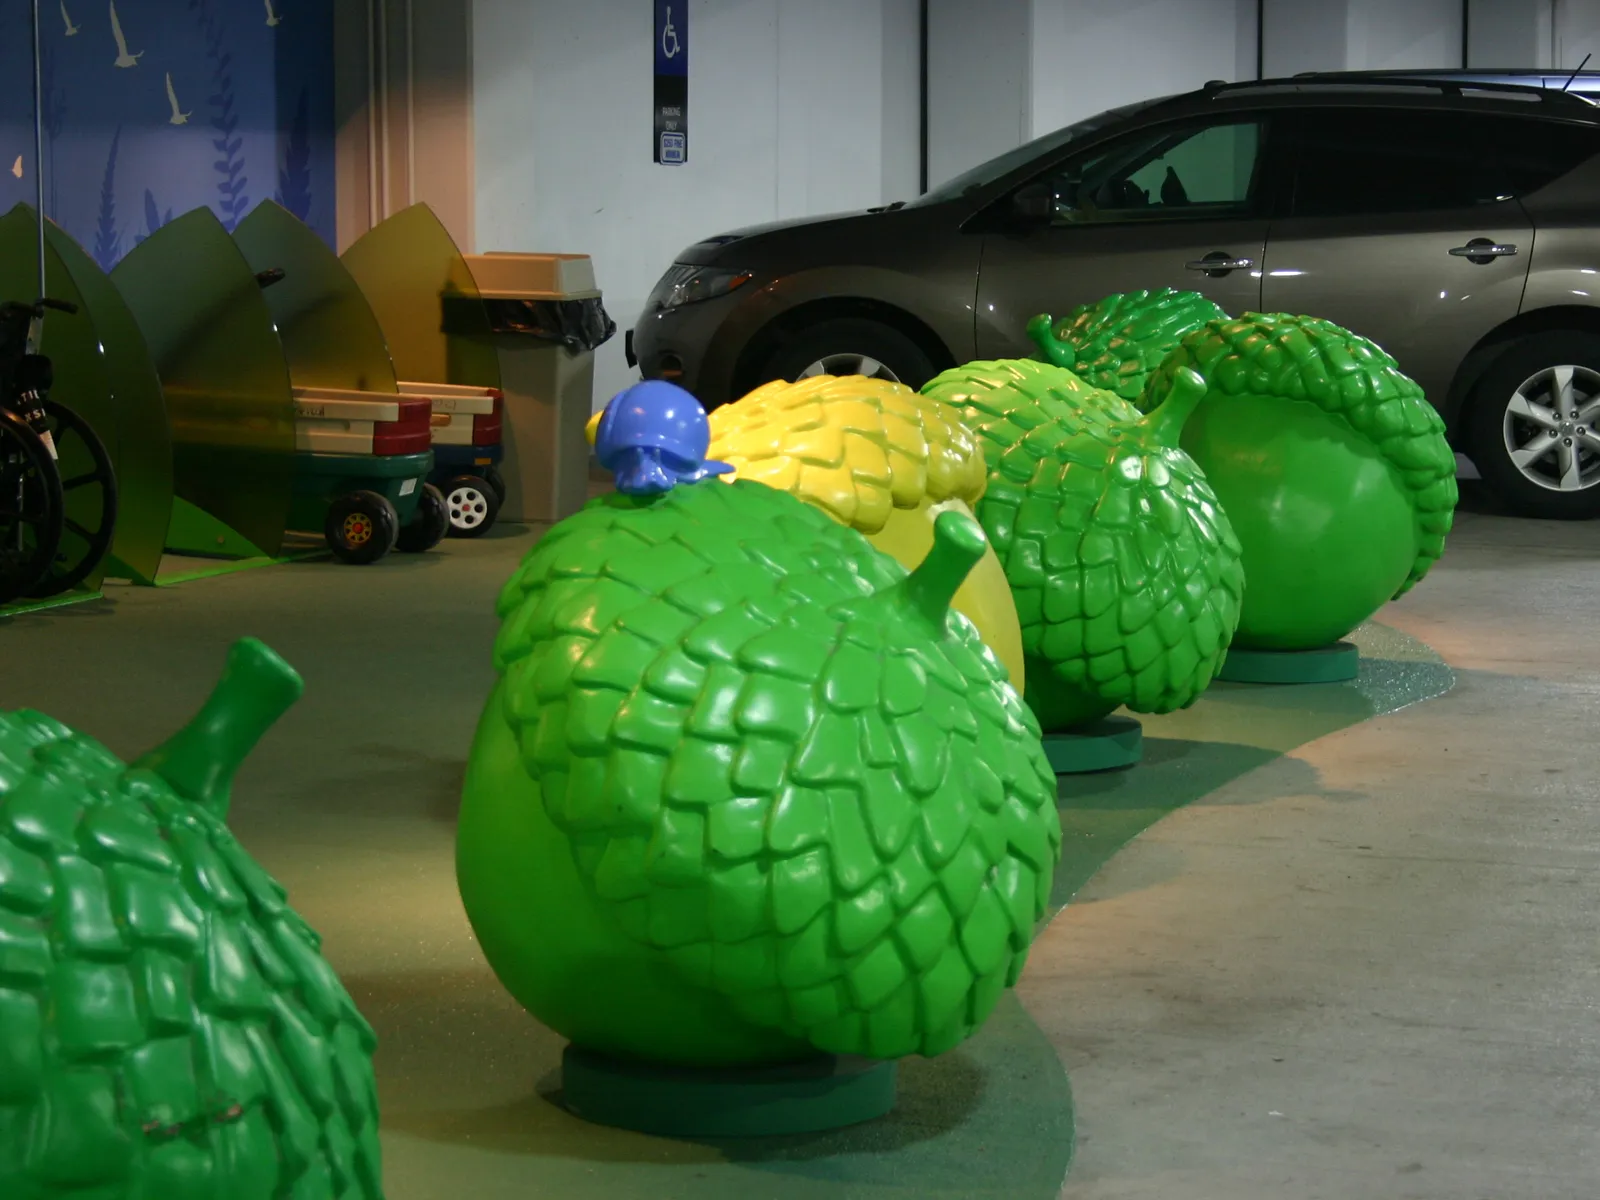 Large green and yellow acorn sculptures